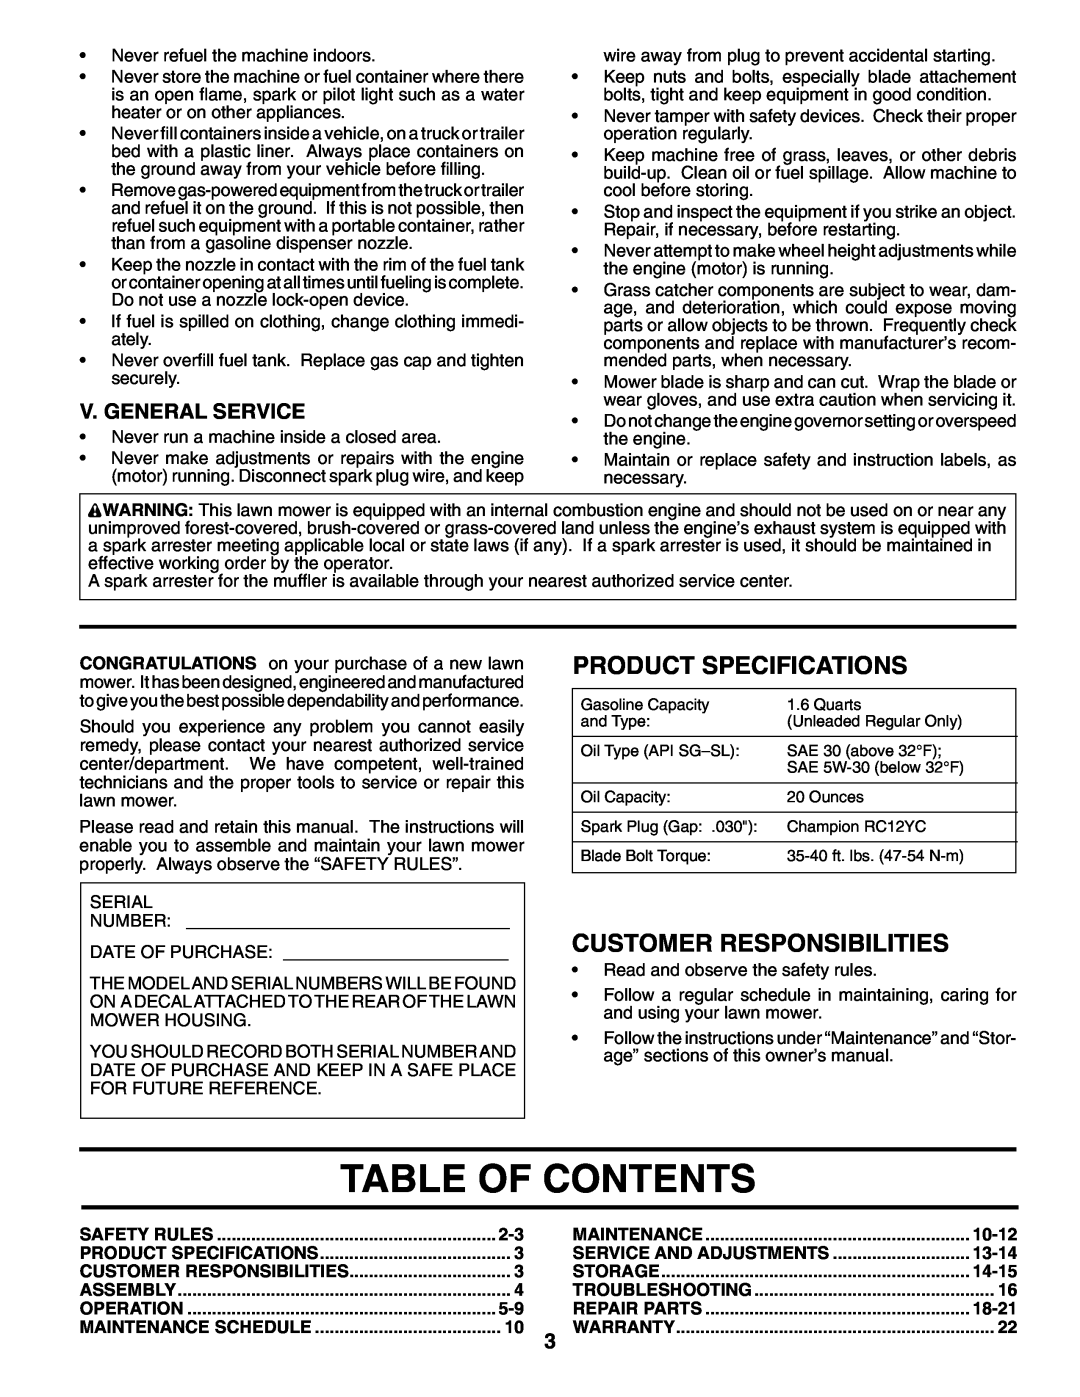 Husqvarna 7021RS owner manual Table Of Contents, Product Specifications, Customer Responsibilities, V. General Service 